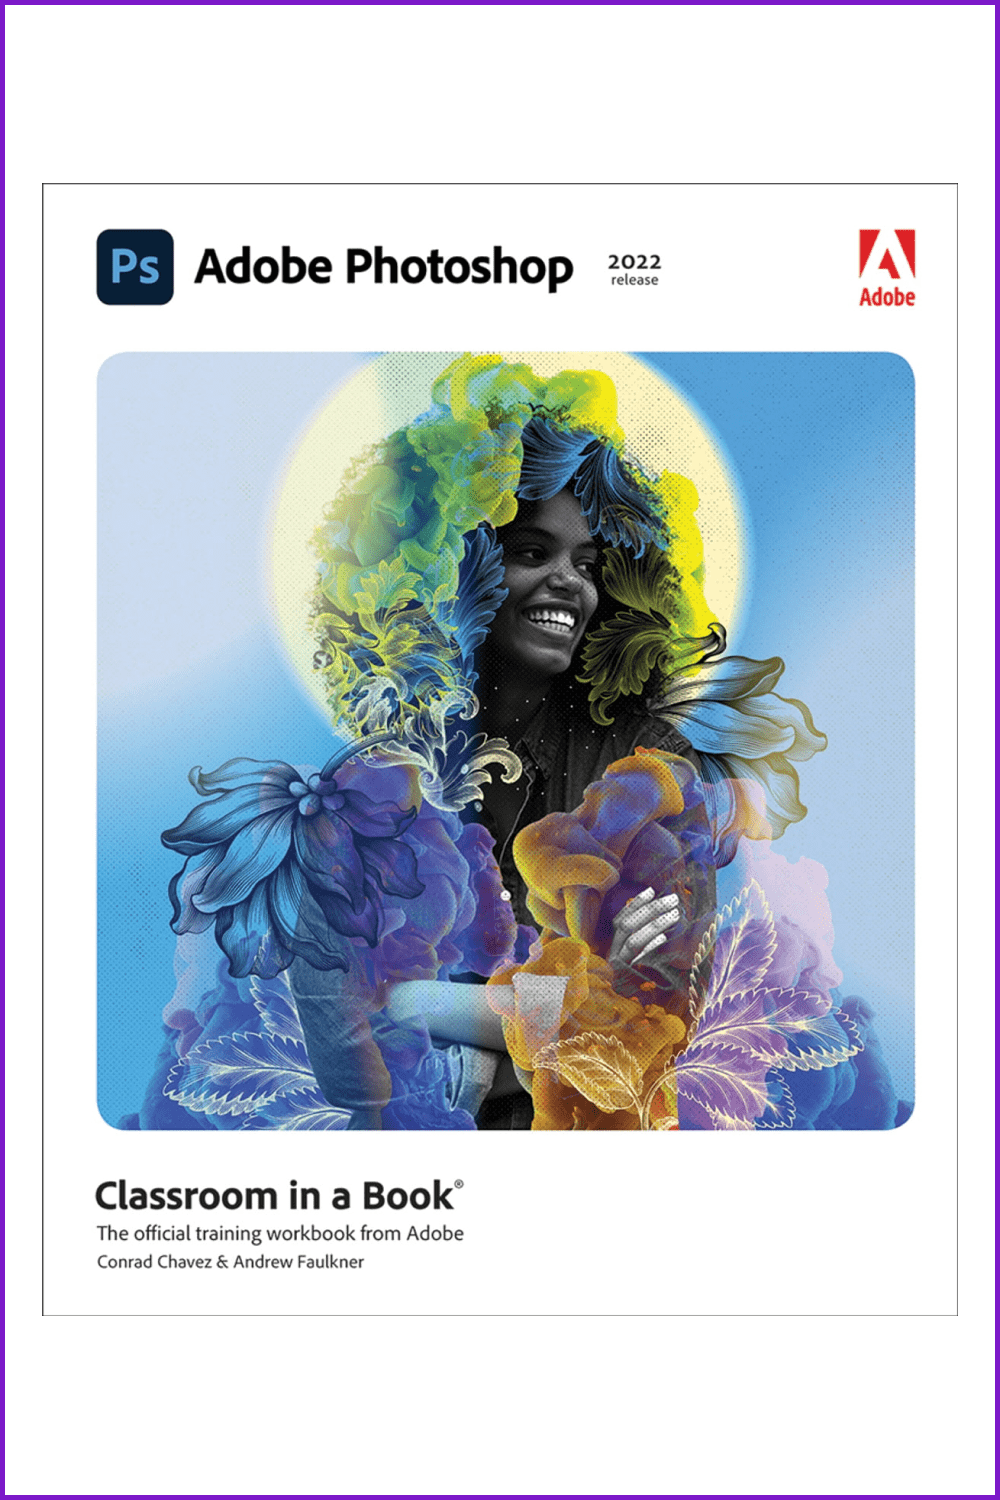 Adobe Photoshop Classroom in a Book (2022 release).